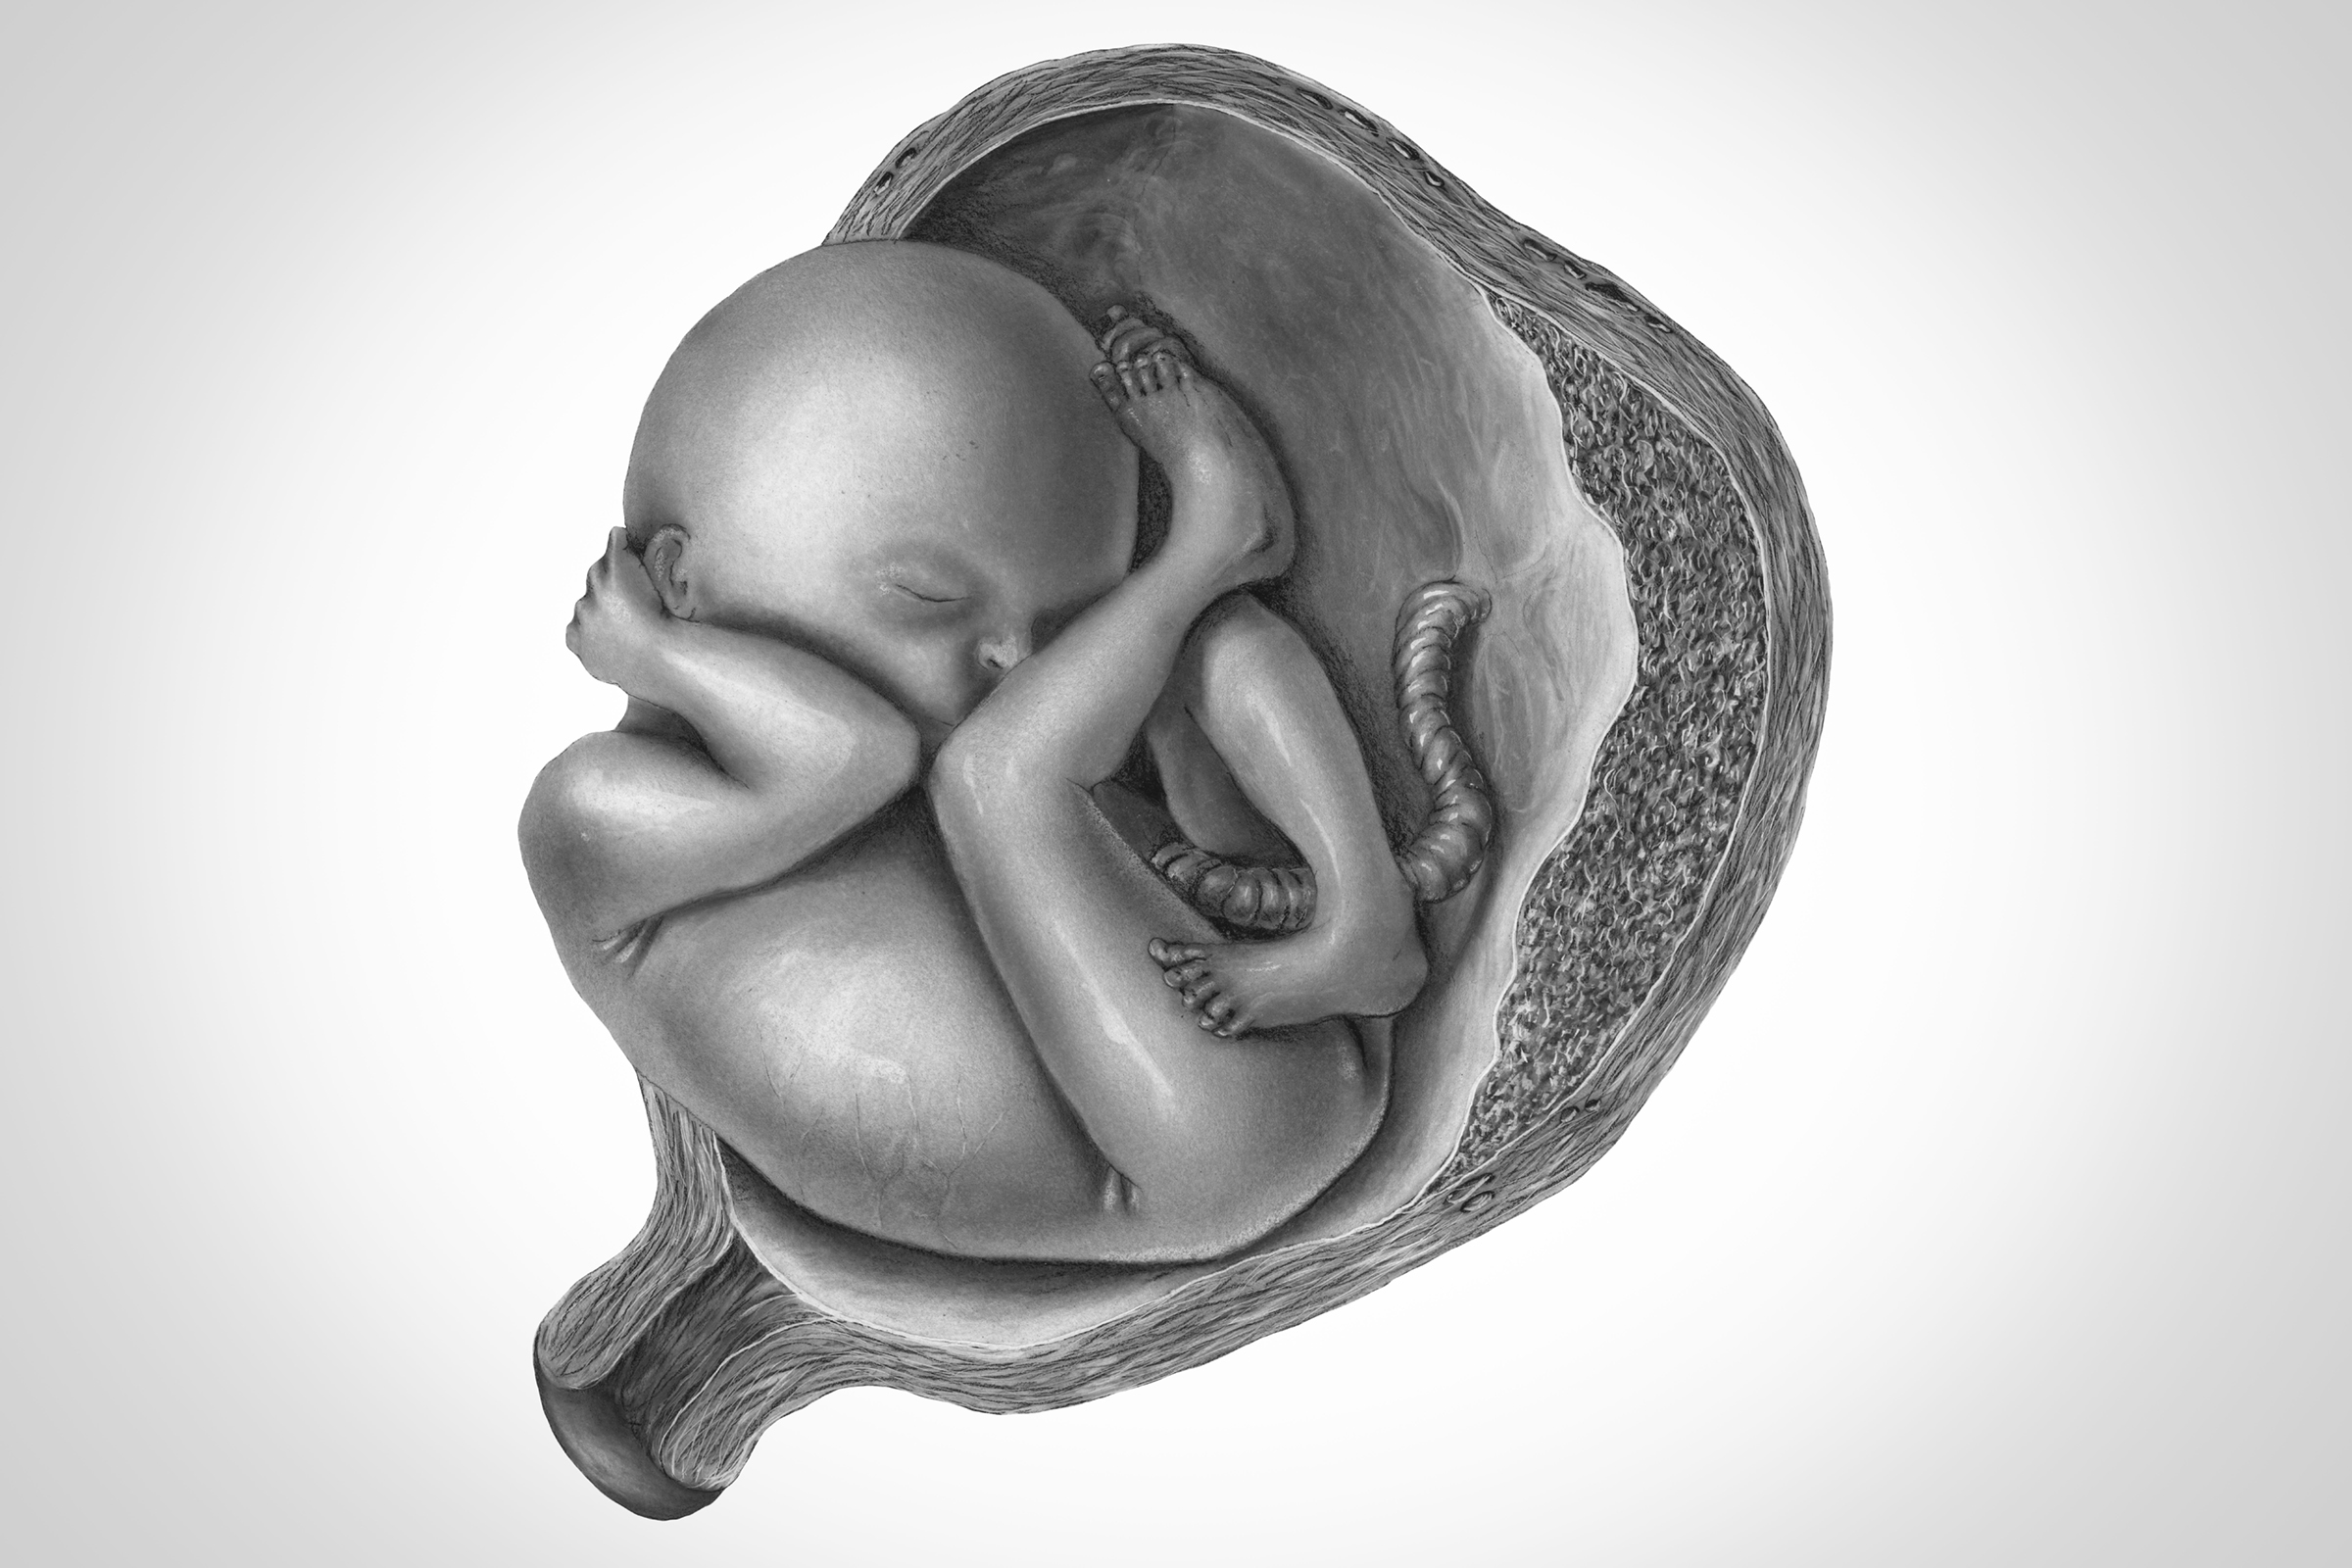 A human fetus in utero. (Getty Images)